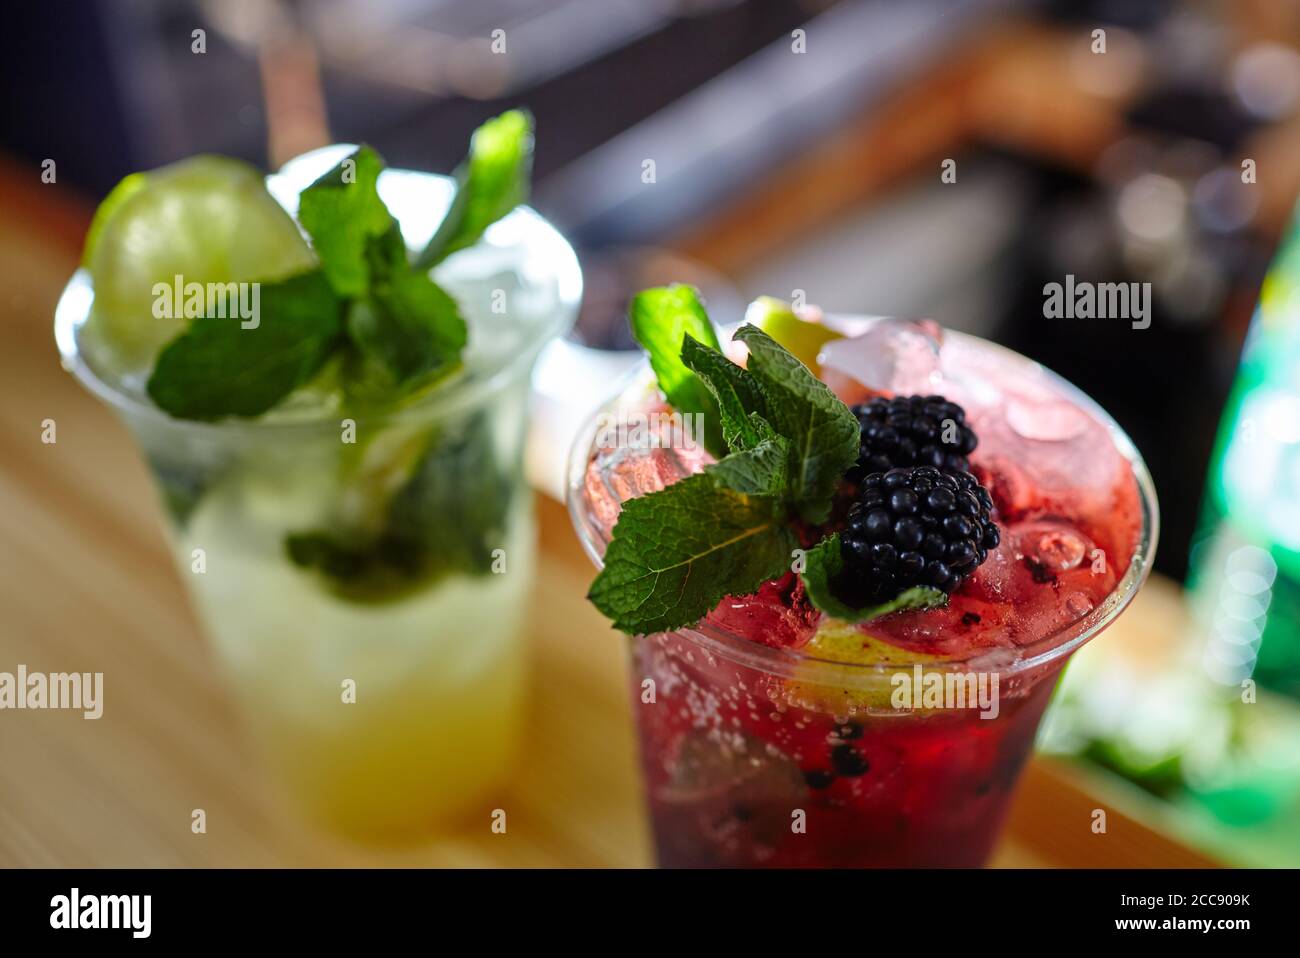 Mojito cocktails or soda drink with lime,fruits and mint on bar counter.Blurred image,selective focus Stock Photo